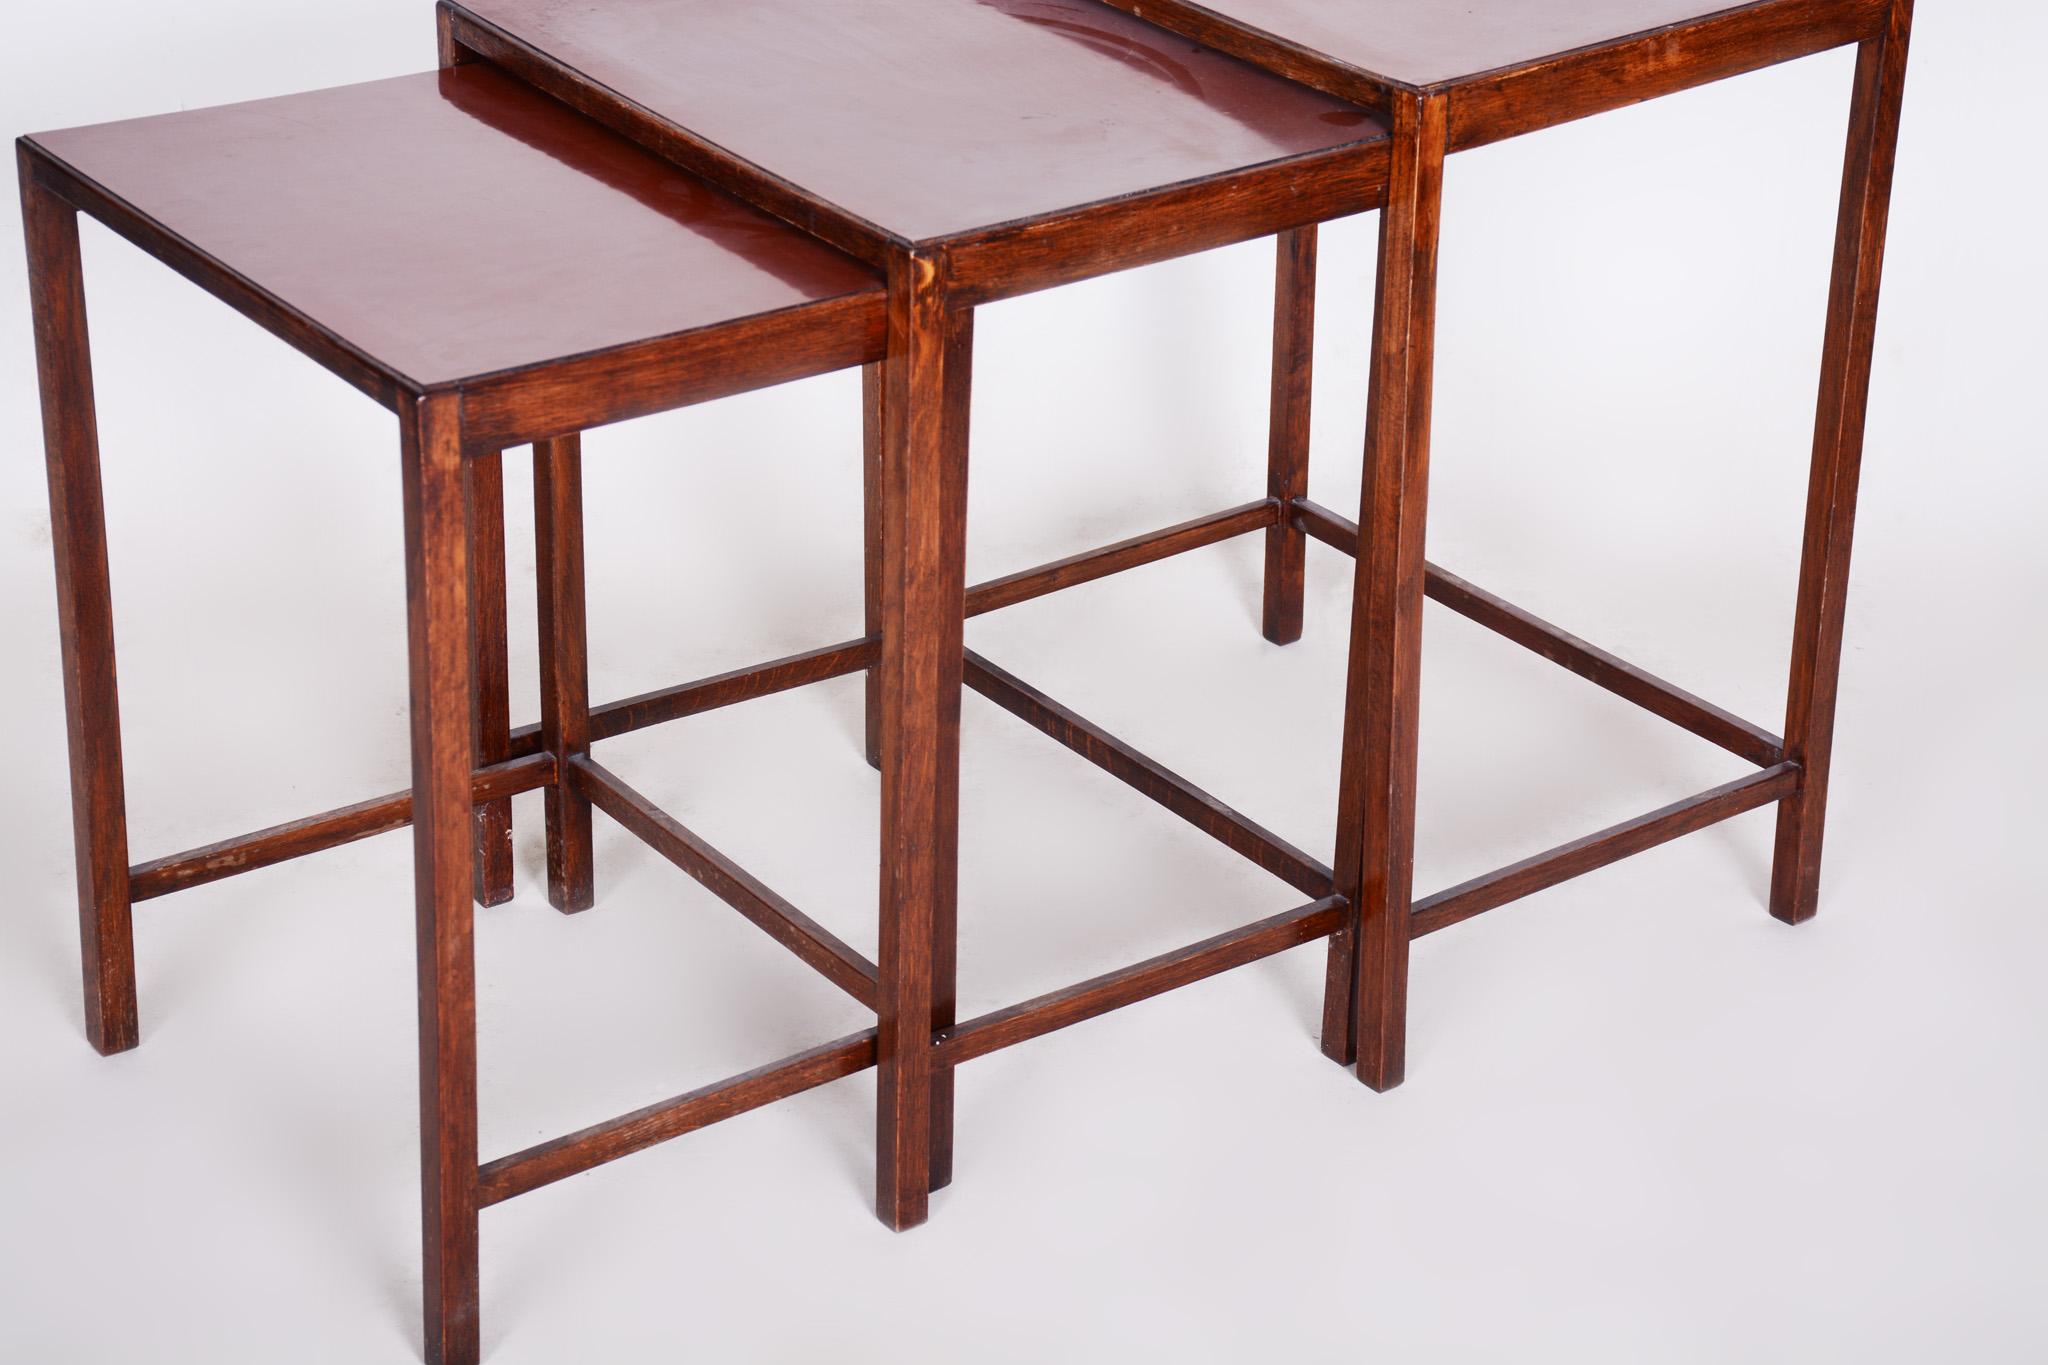 Wood Original Condition Brown Nest Tables Made in the 1930s by Halabala, Czech